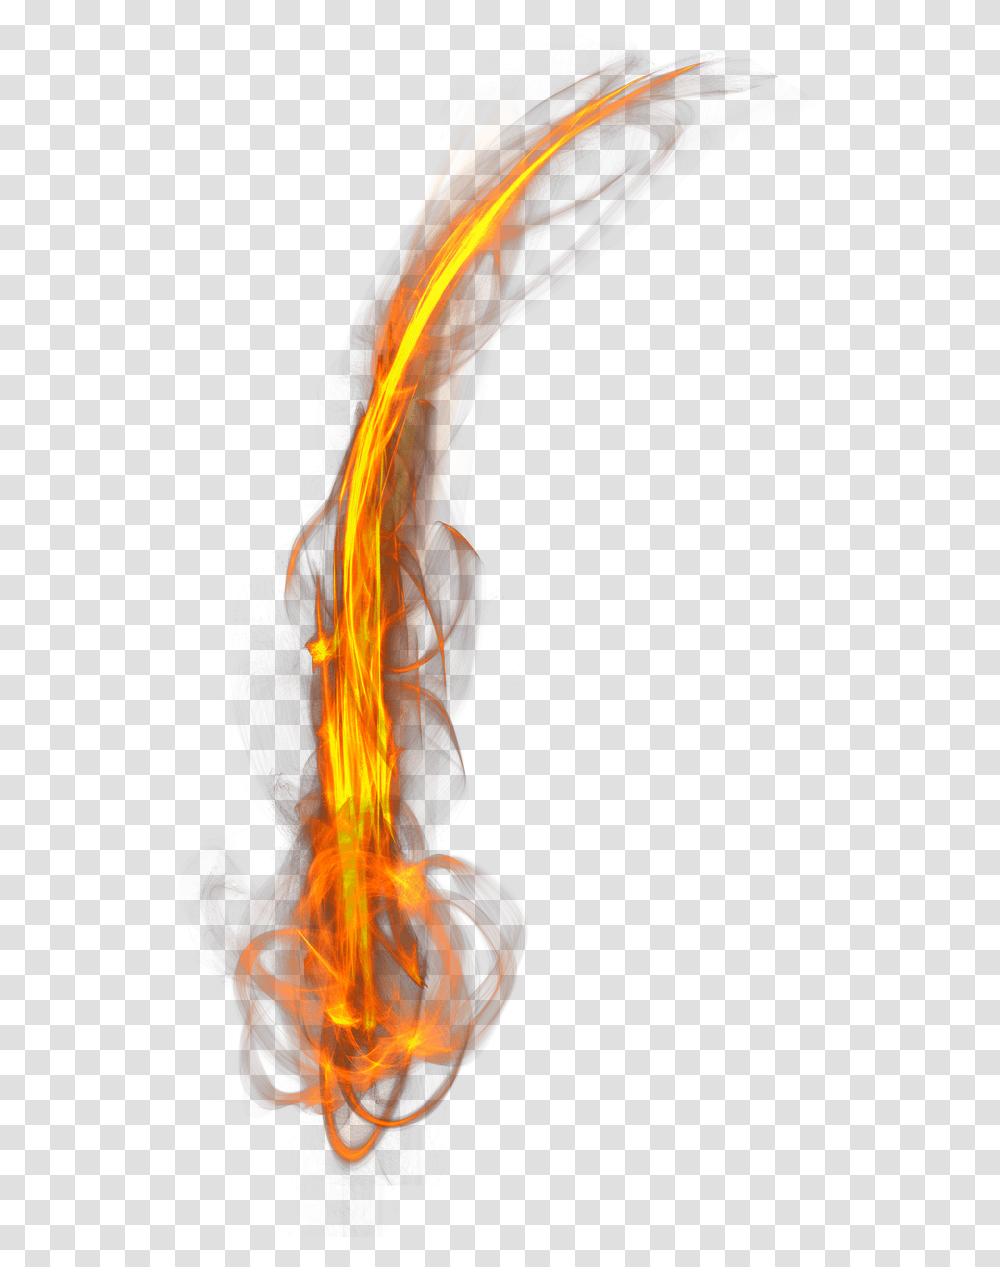 Fire Light Flame Image High Quality Fire Line Transparent Png